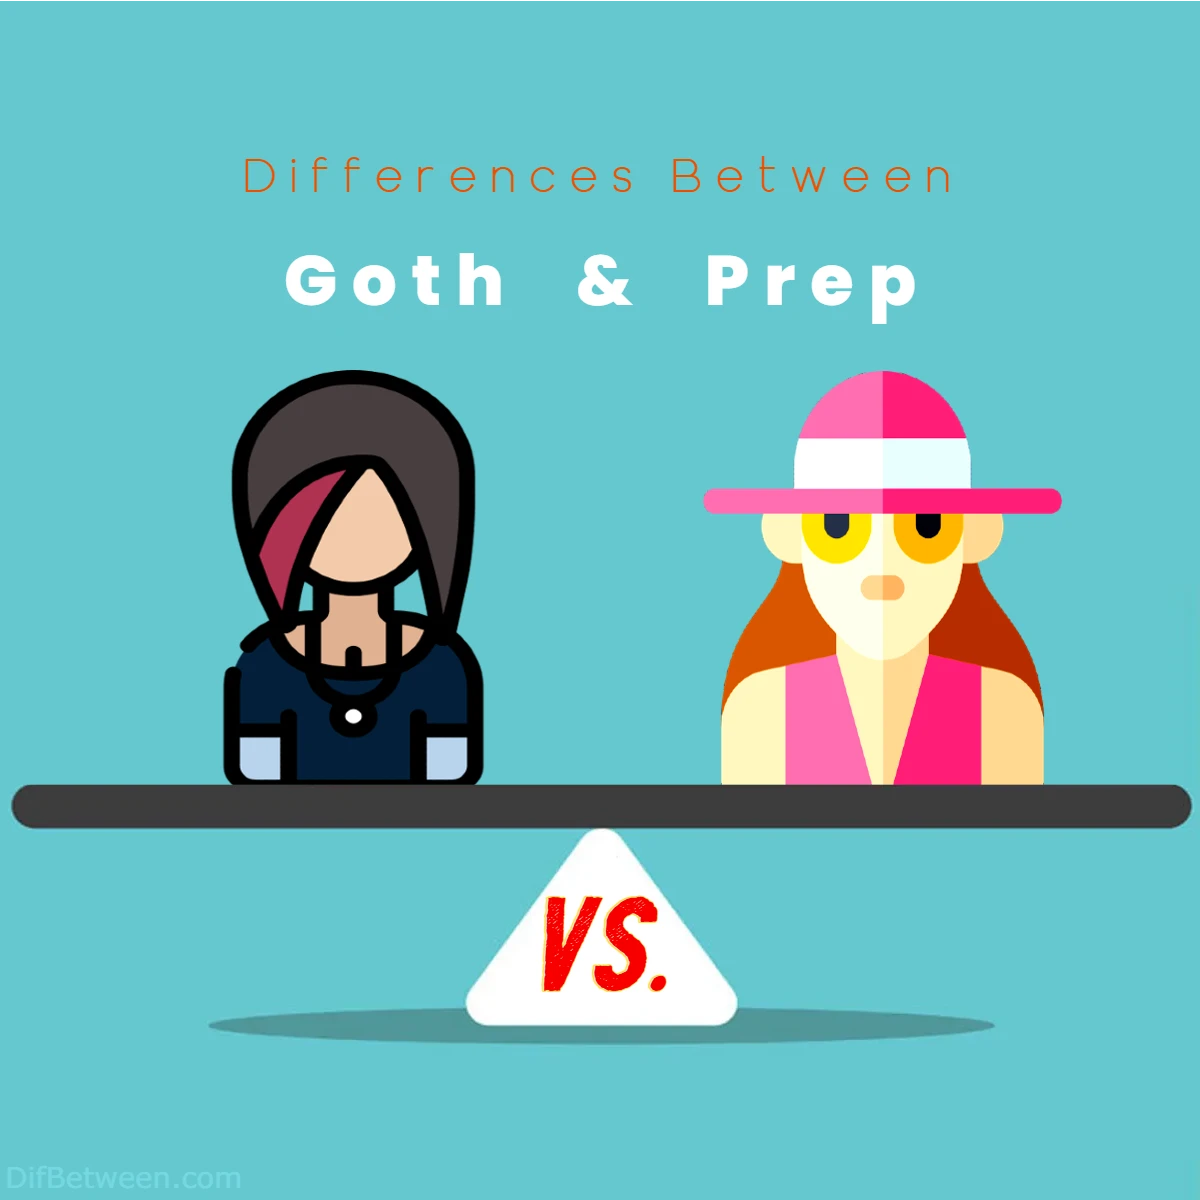 Differences Between Goth vs Prep